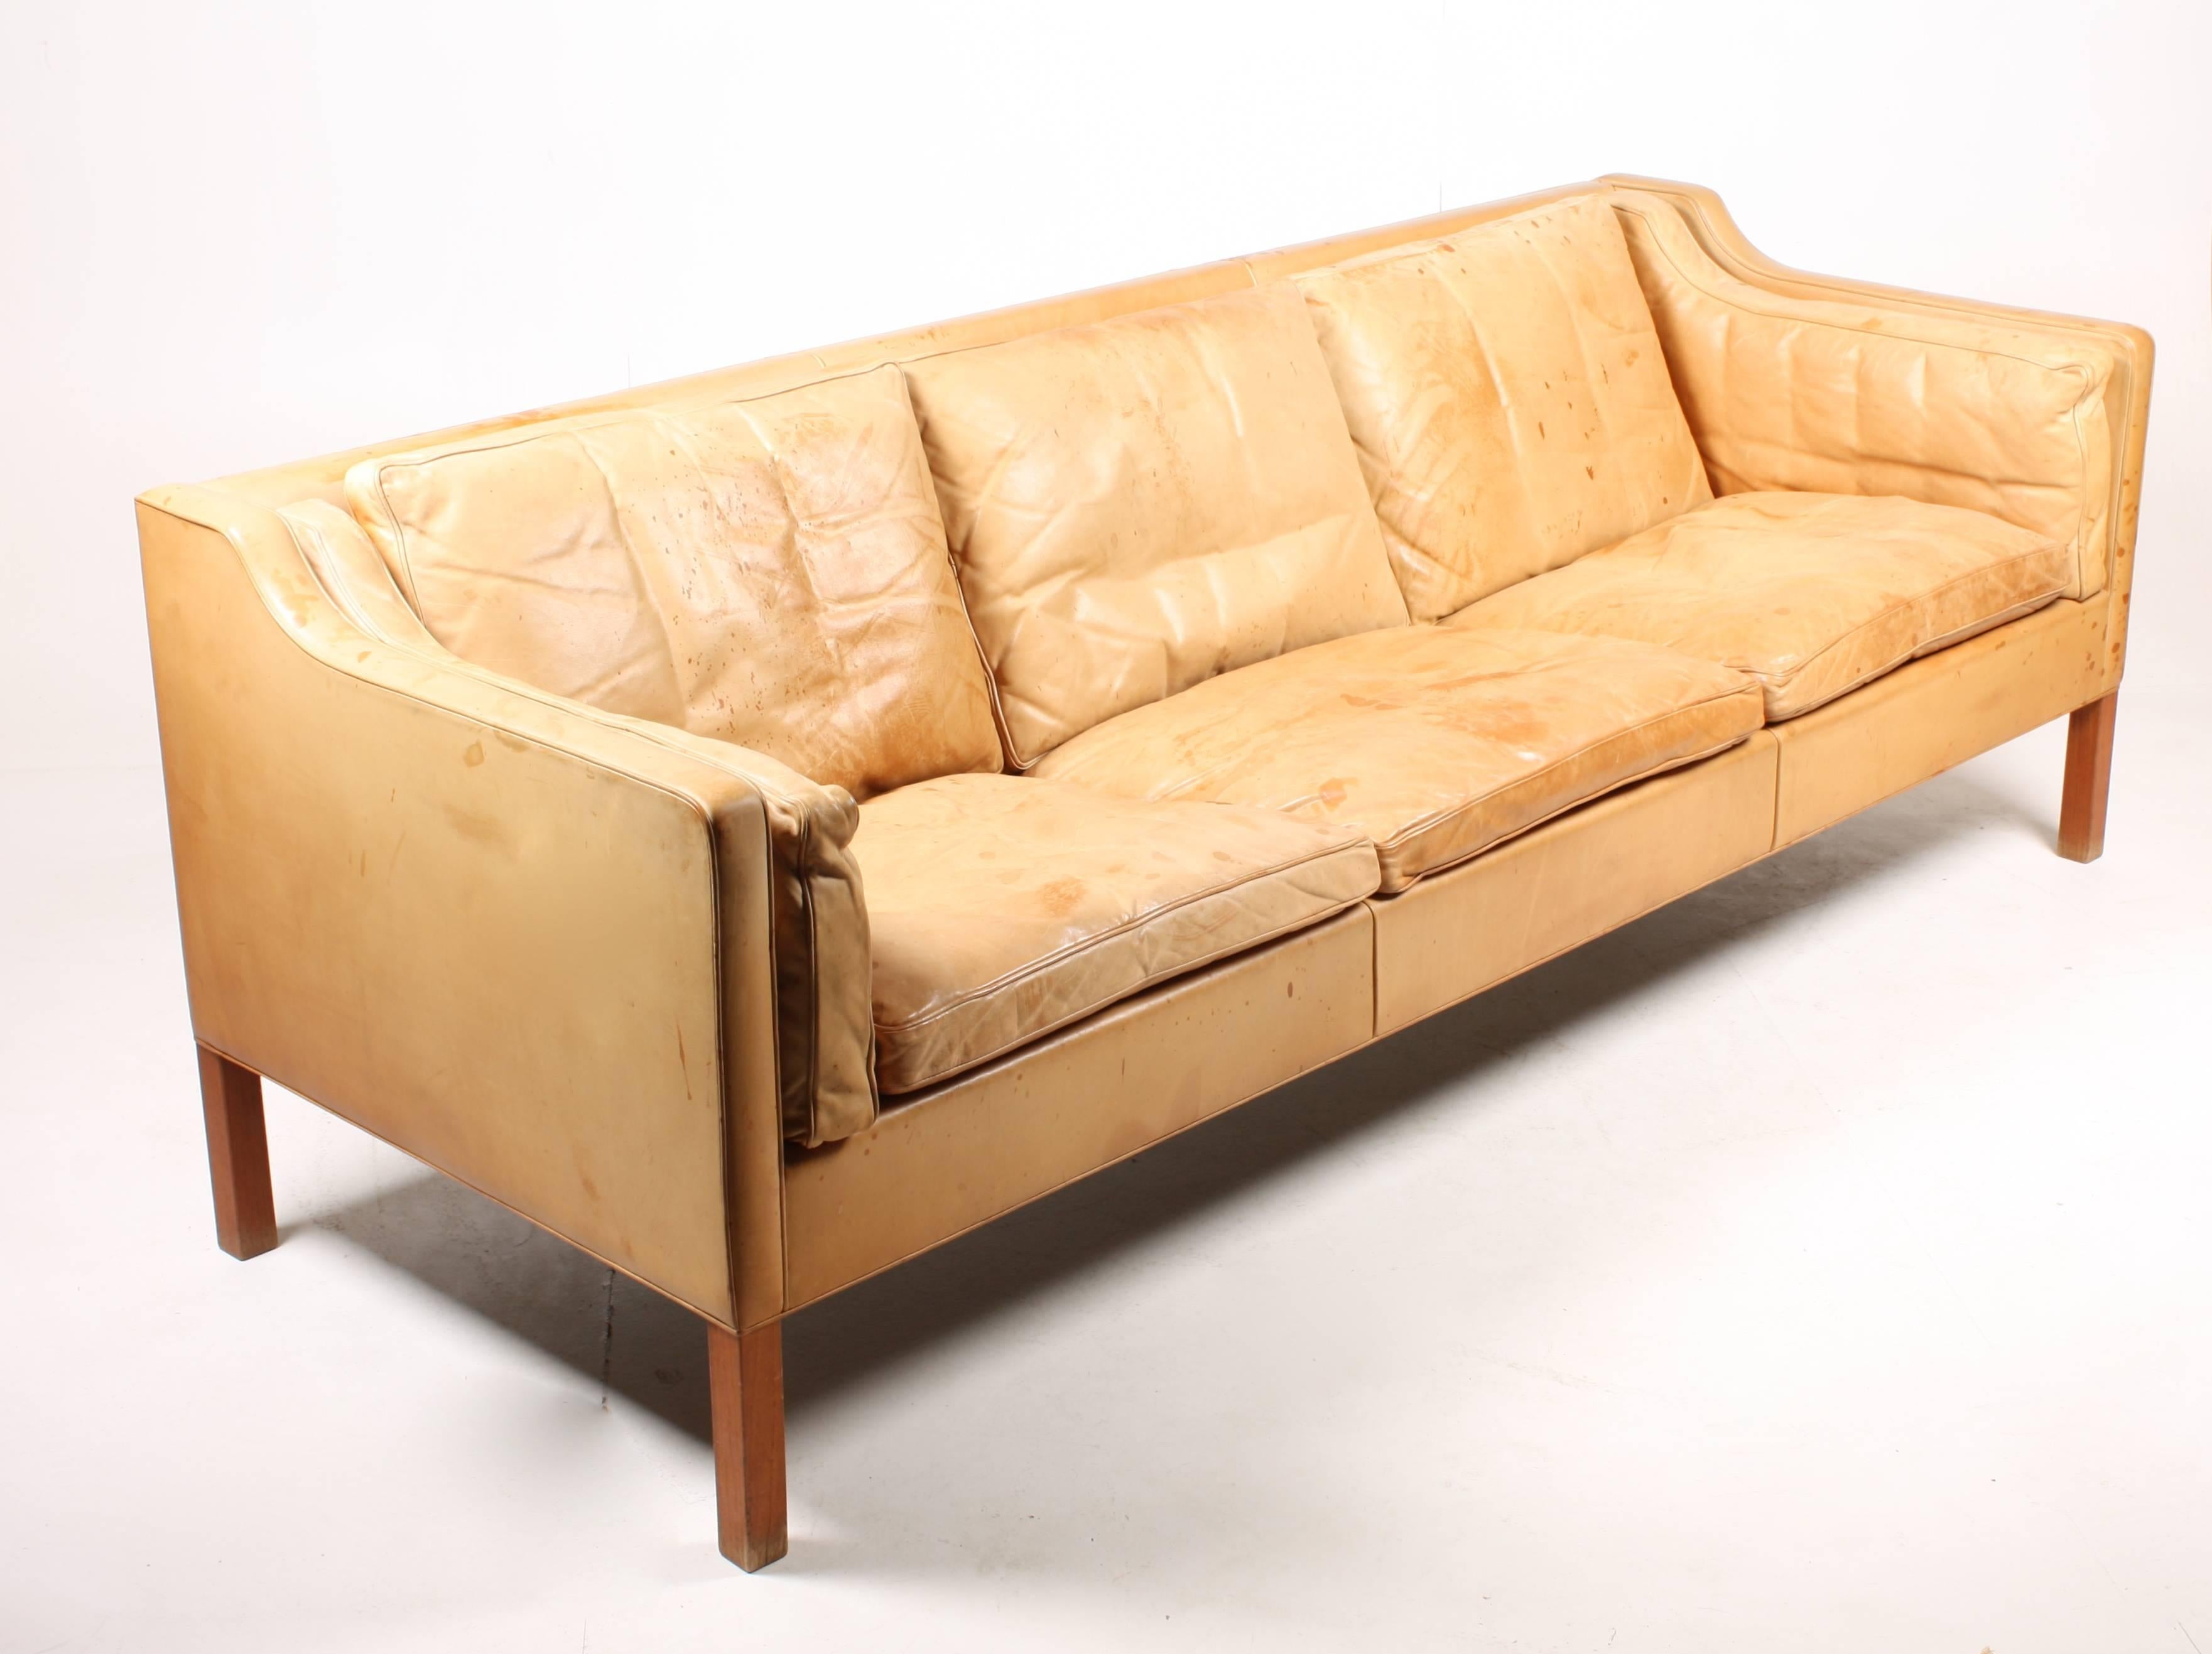 Sofa model 2213 in patinated leather designed by MAA. Børge Mogensen for Fredericia Møbelfabrik in 1962. The sofa was designed as an input for Mogensen’s own home only but is today the most iconic Danish design sofa of all times. Out standing